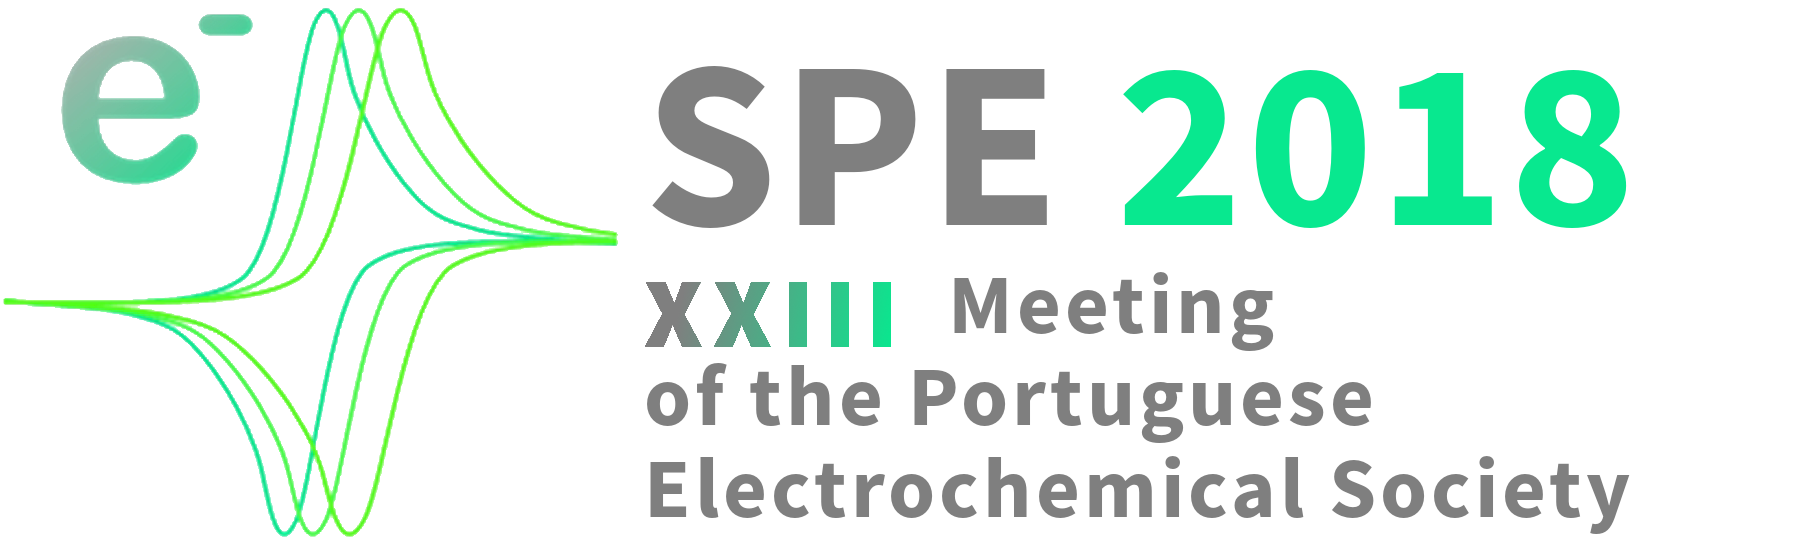 XXIII Meeting of the Portuguese Electrochemical Society